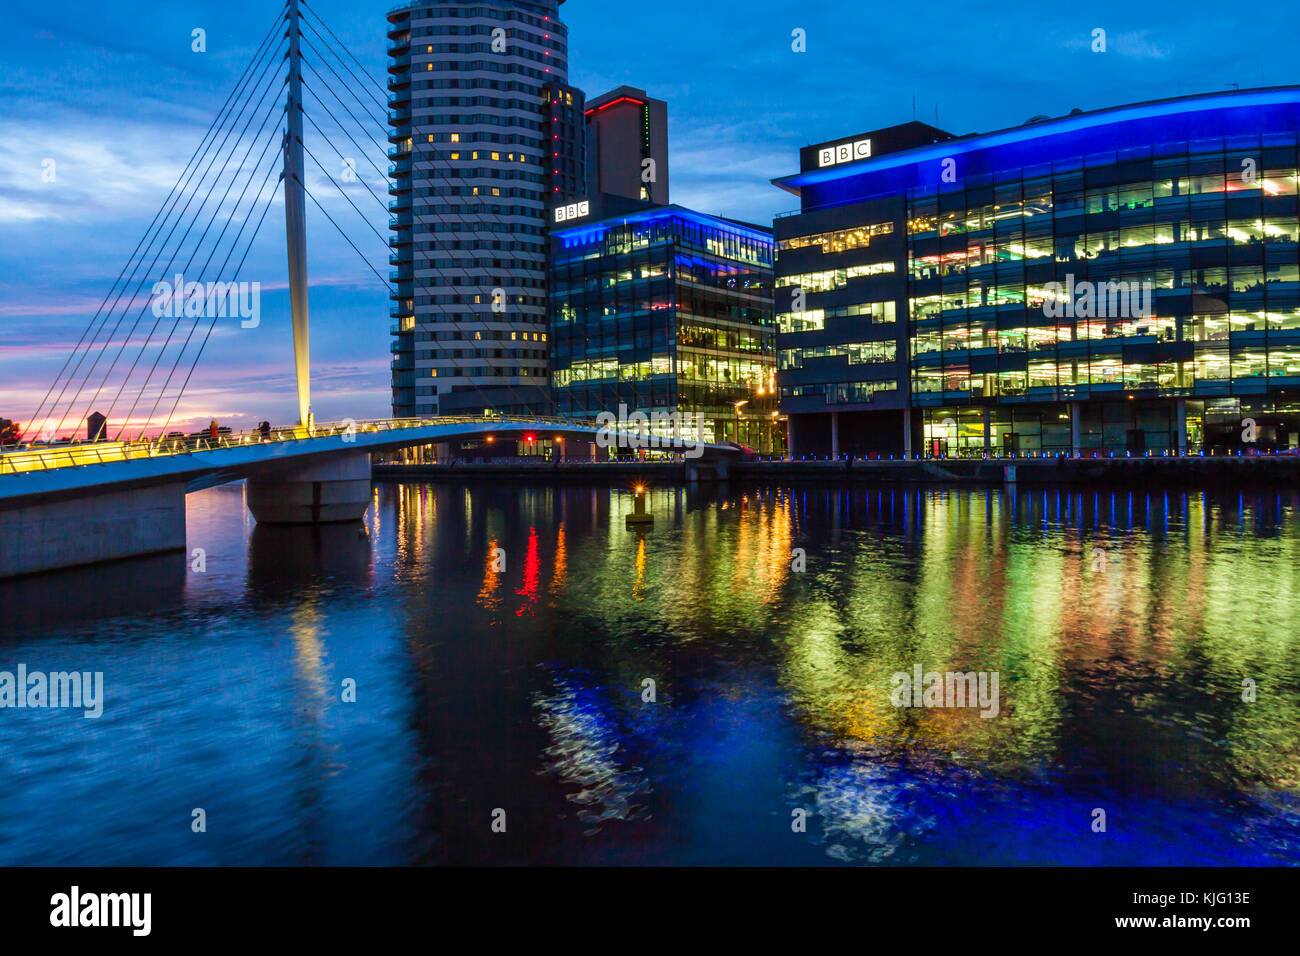 Evening Images of Media City Salford on the Manchester Ship Canal. Salford Quays. Stock Photo